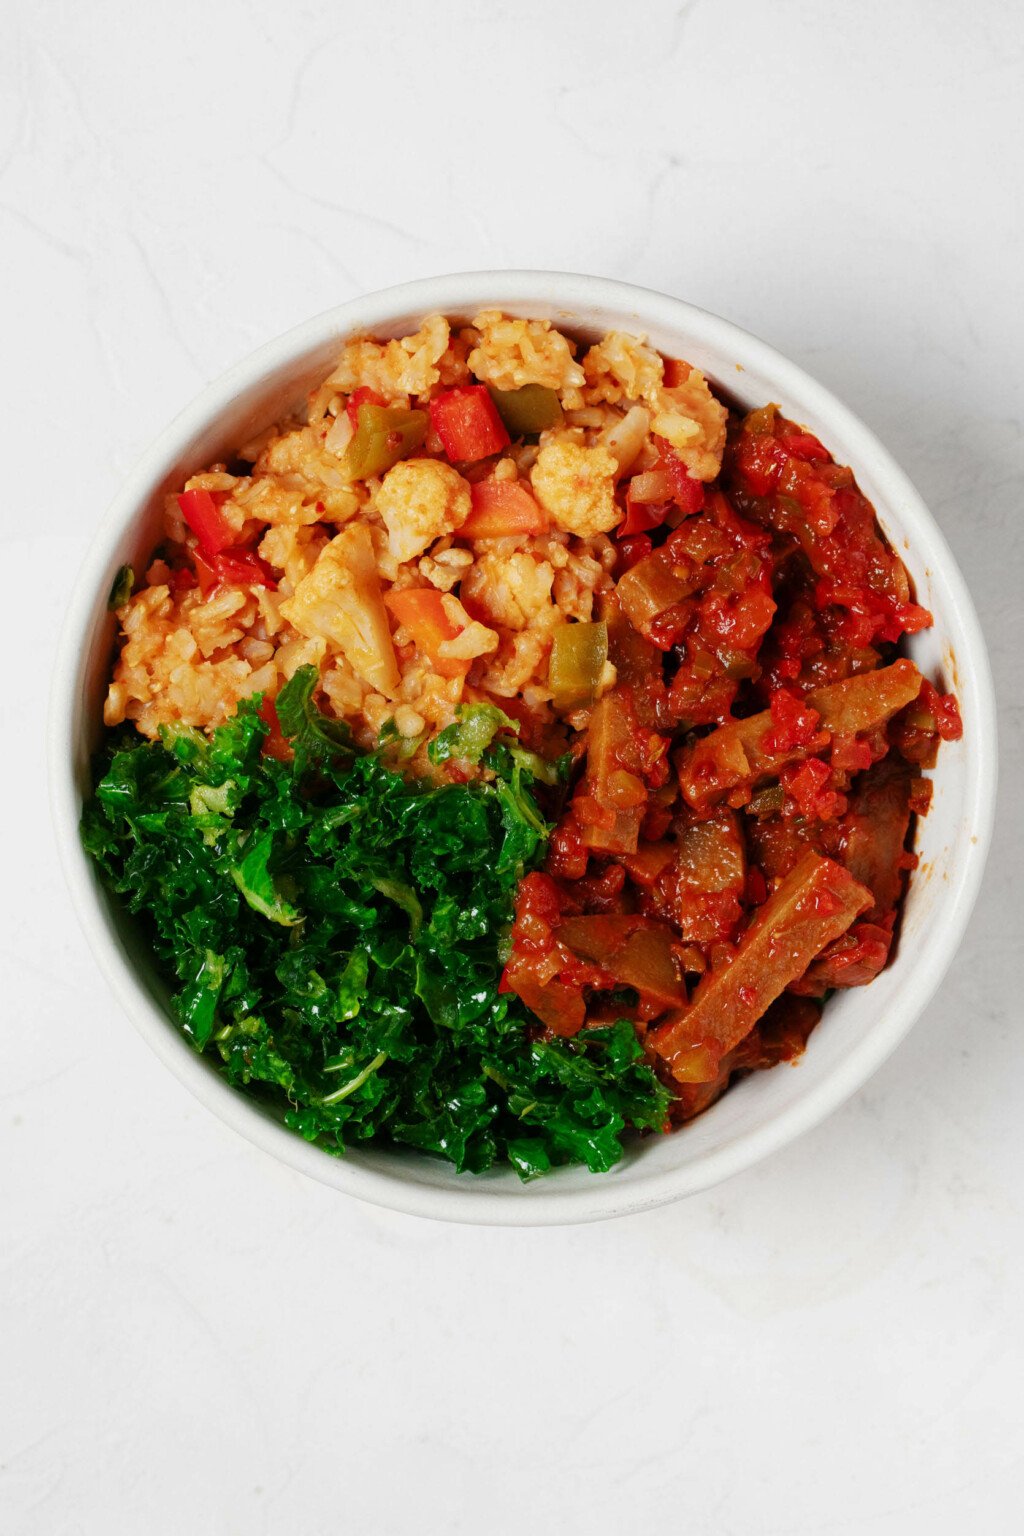 An overhead image of a round white bowl, which has been filled with a colorful arrangement of rice, vegetables, spiced seitan, and curly green kale.